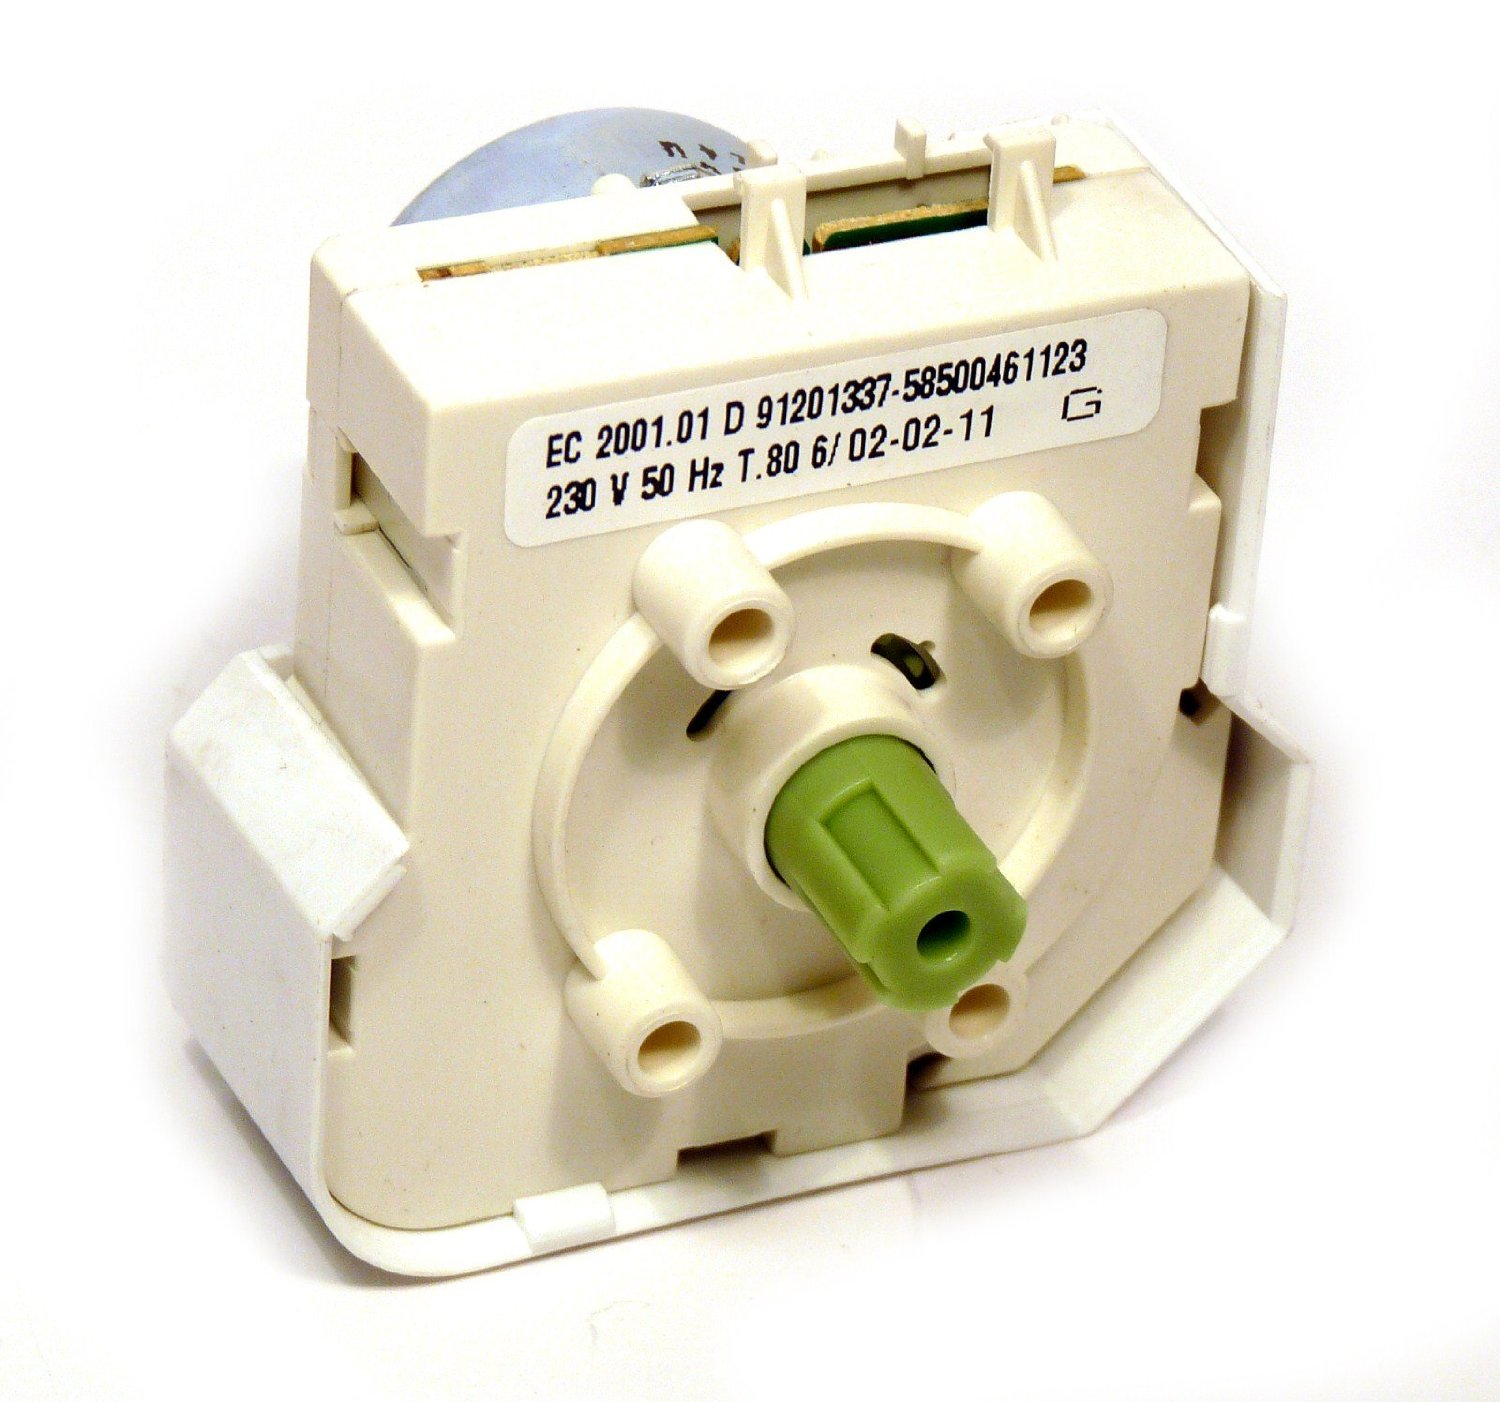 CANDY HOOVER WASHING MACHINE 91201337 ROTARY TIMER SWITCH